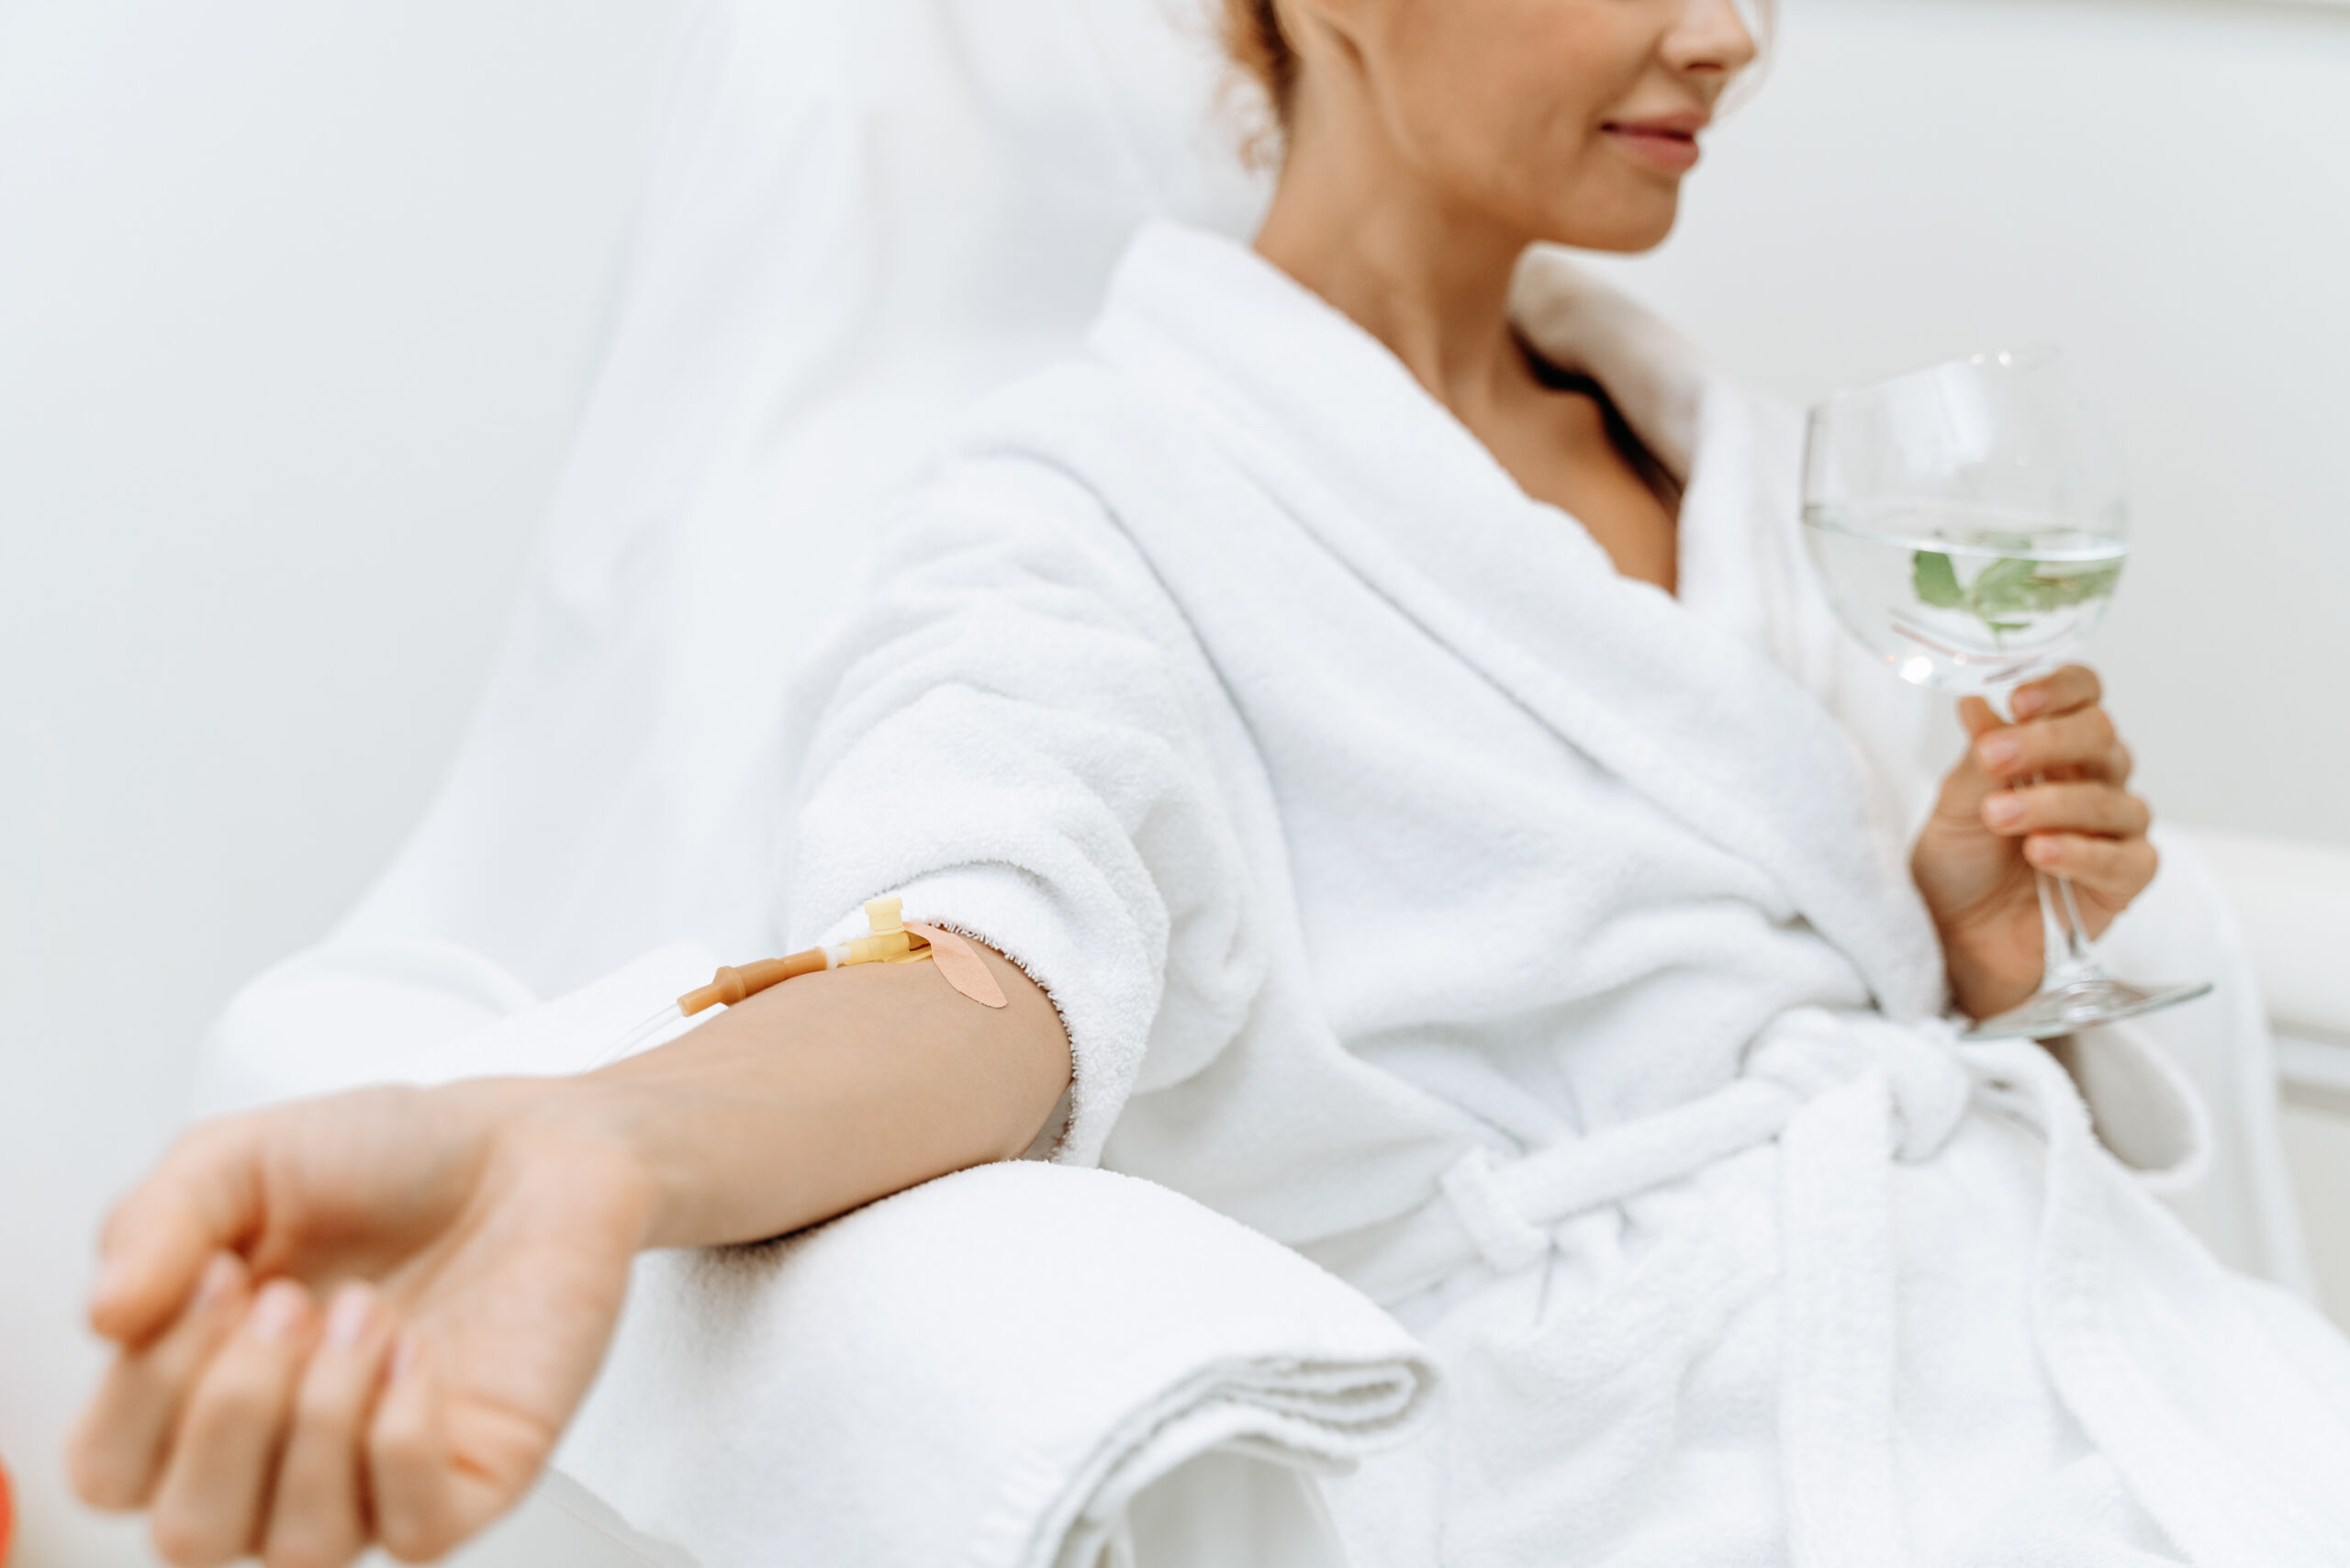 iv infusion therapy for woman - Health and Wellness Center